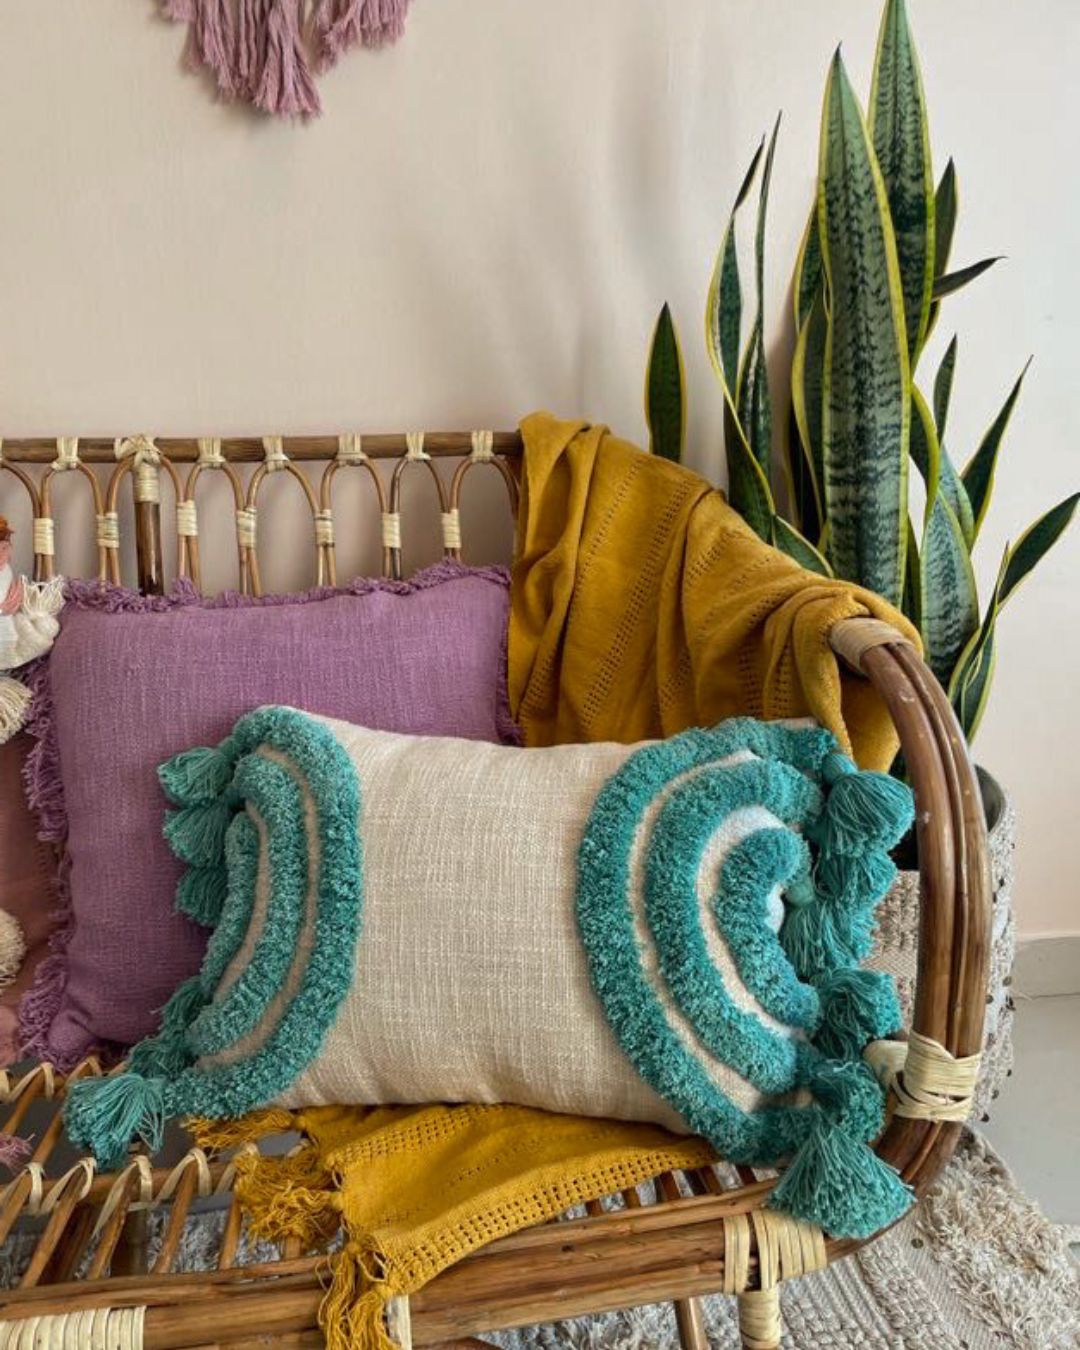 A bohemia-themed tassled and frilled pillow, showcasing its intricate design and earthy, vibrant colors. The decorative fringes and tassels add a touch of whimsical charm to the pillow, creating a unique and inviting decor piece.